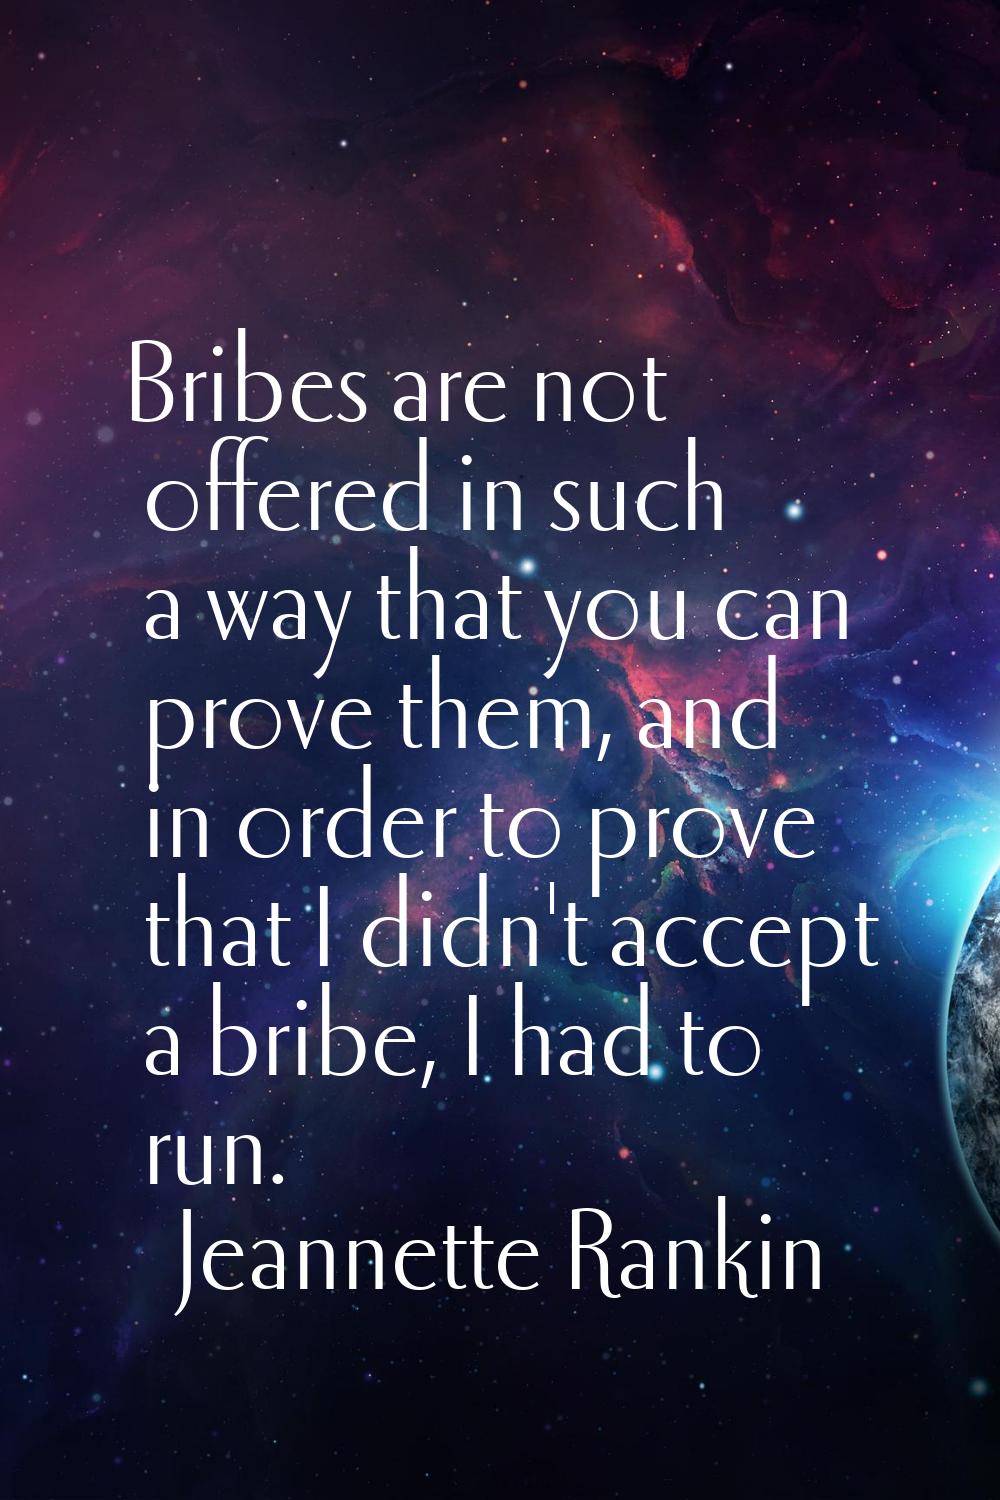 Bribes are not offered in such a way that you can prove them, and in order to prove that I didn't a